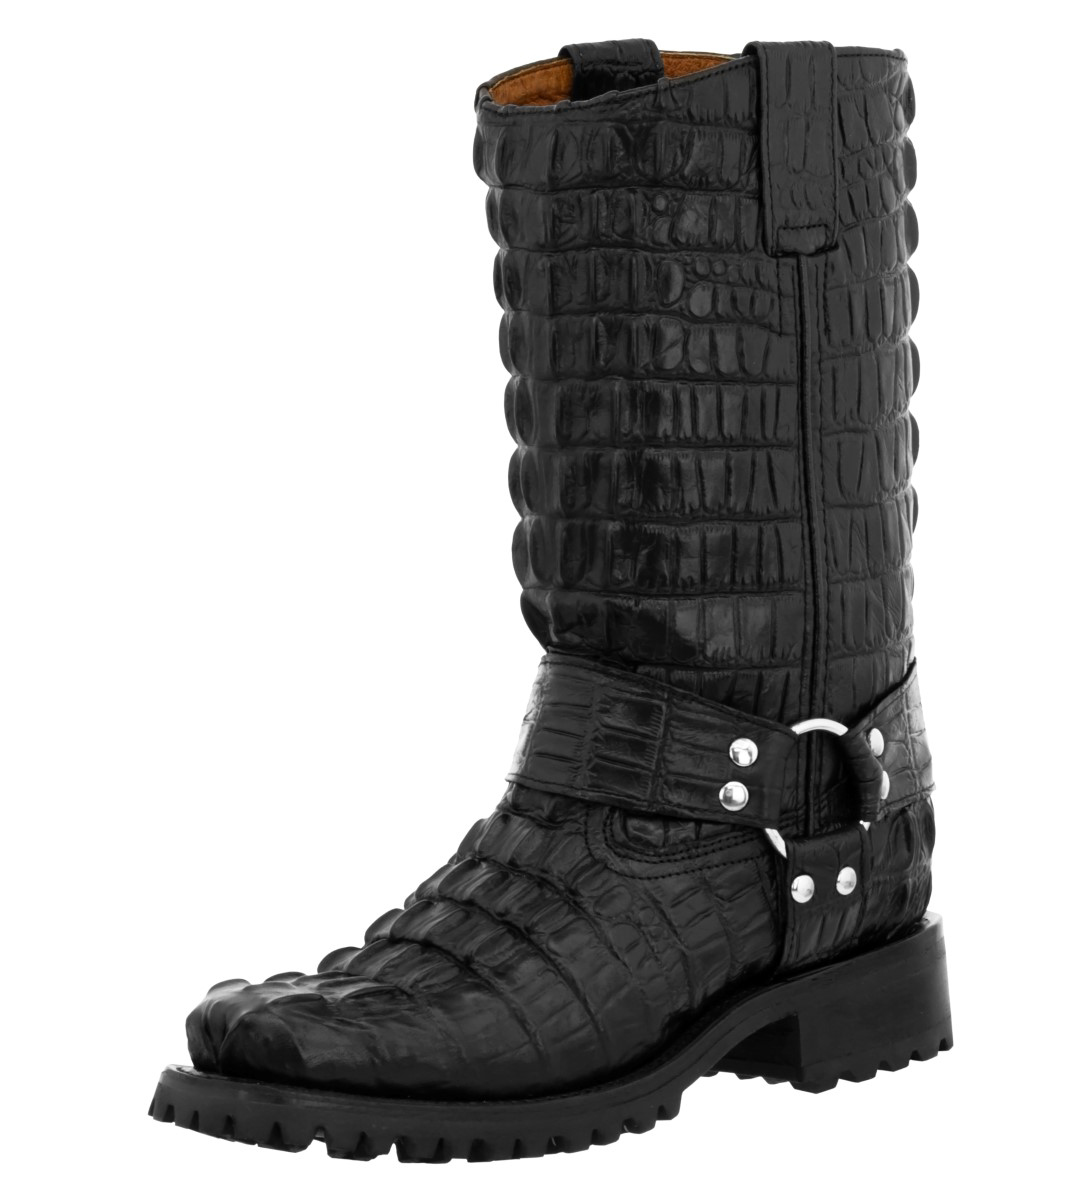 Mens Crocodile Alligator Tail Leather Motorcycle Harness Black Boots | eBay